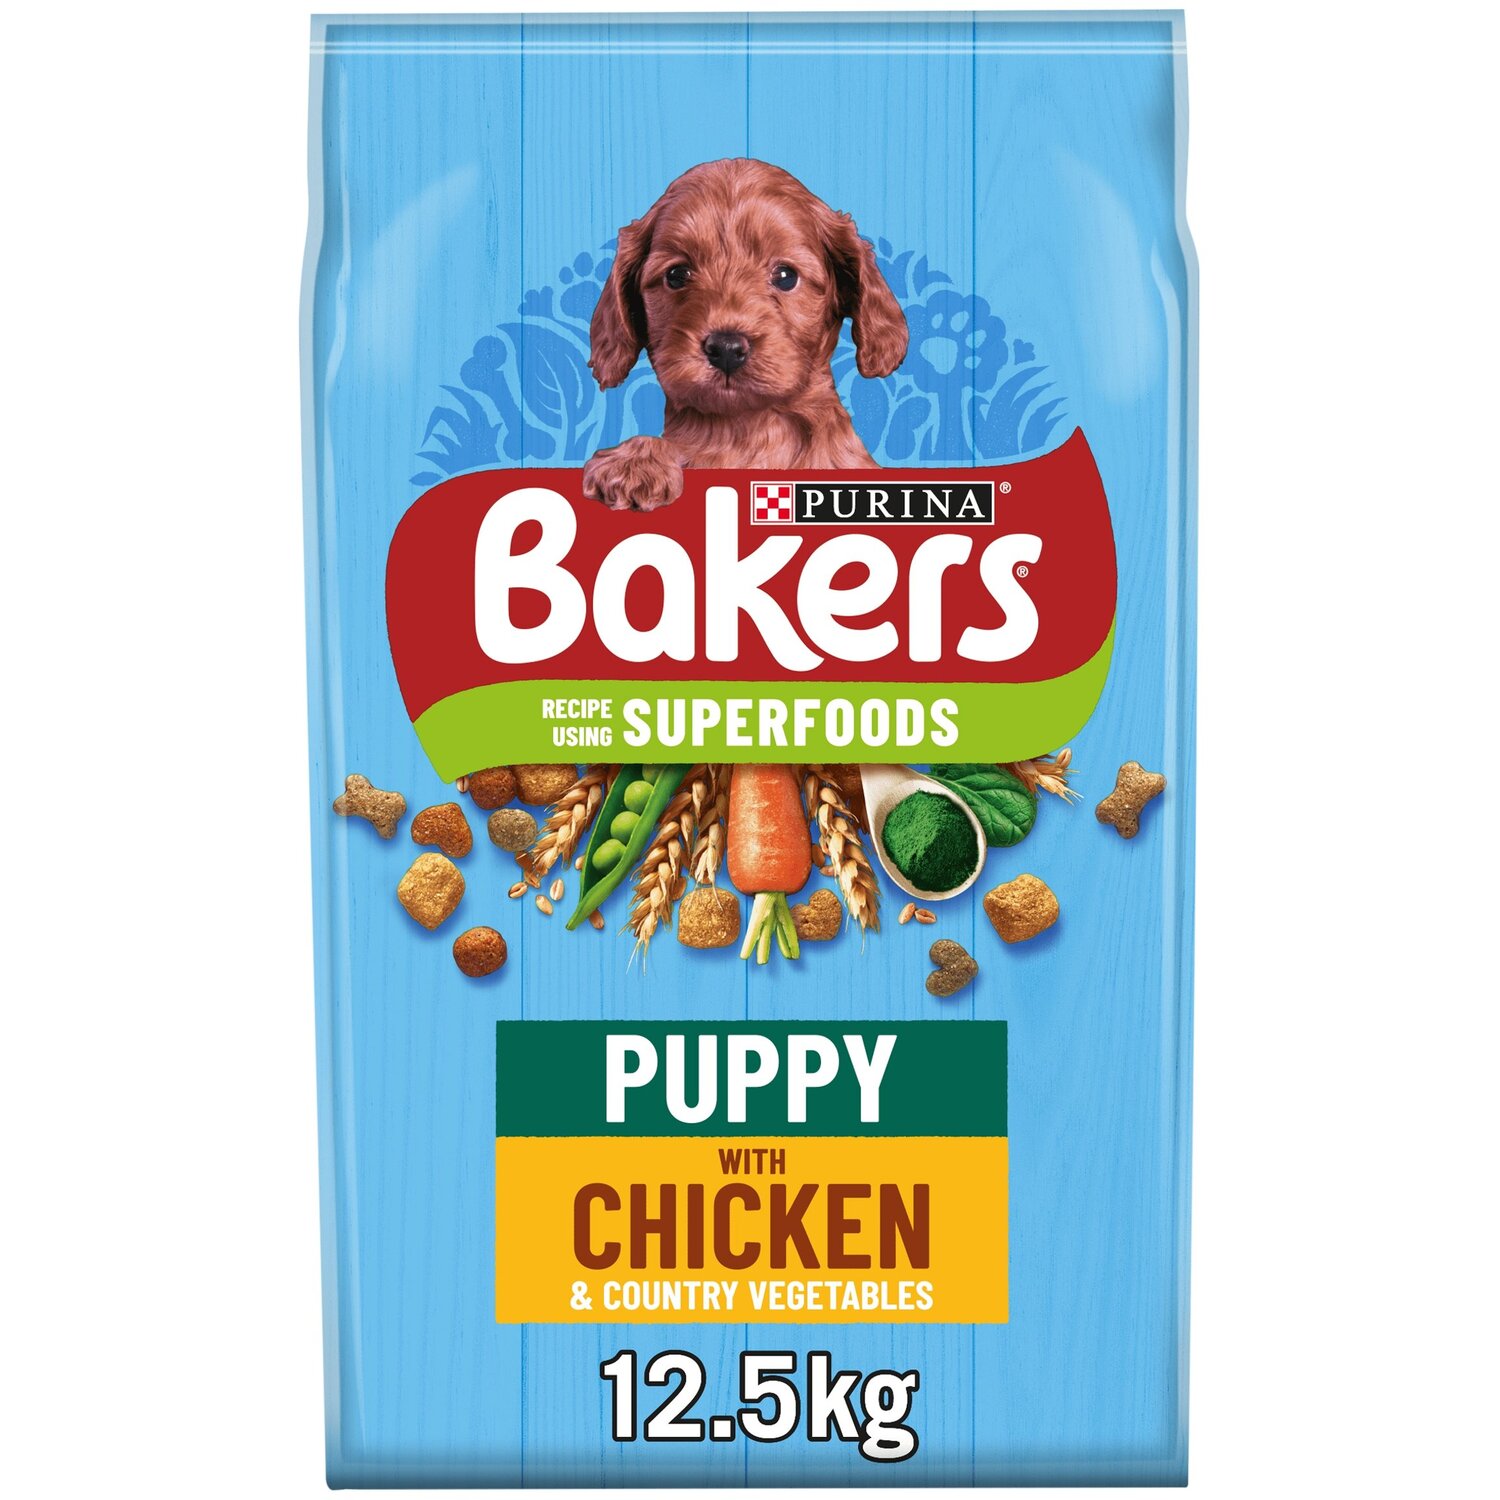 Bakers Complete Puppy Food with Chicken and Country Vegetables 12.5kg Image